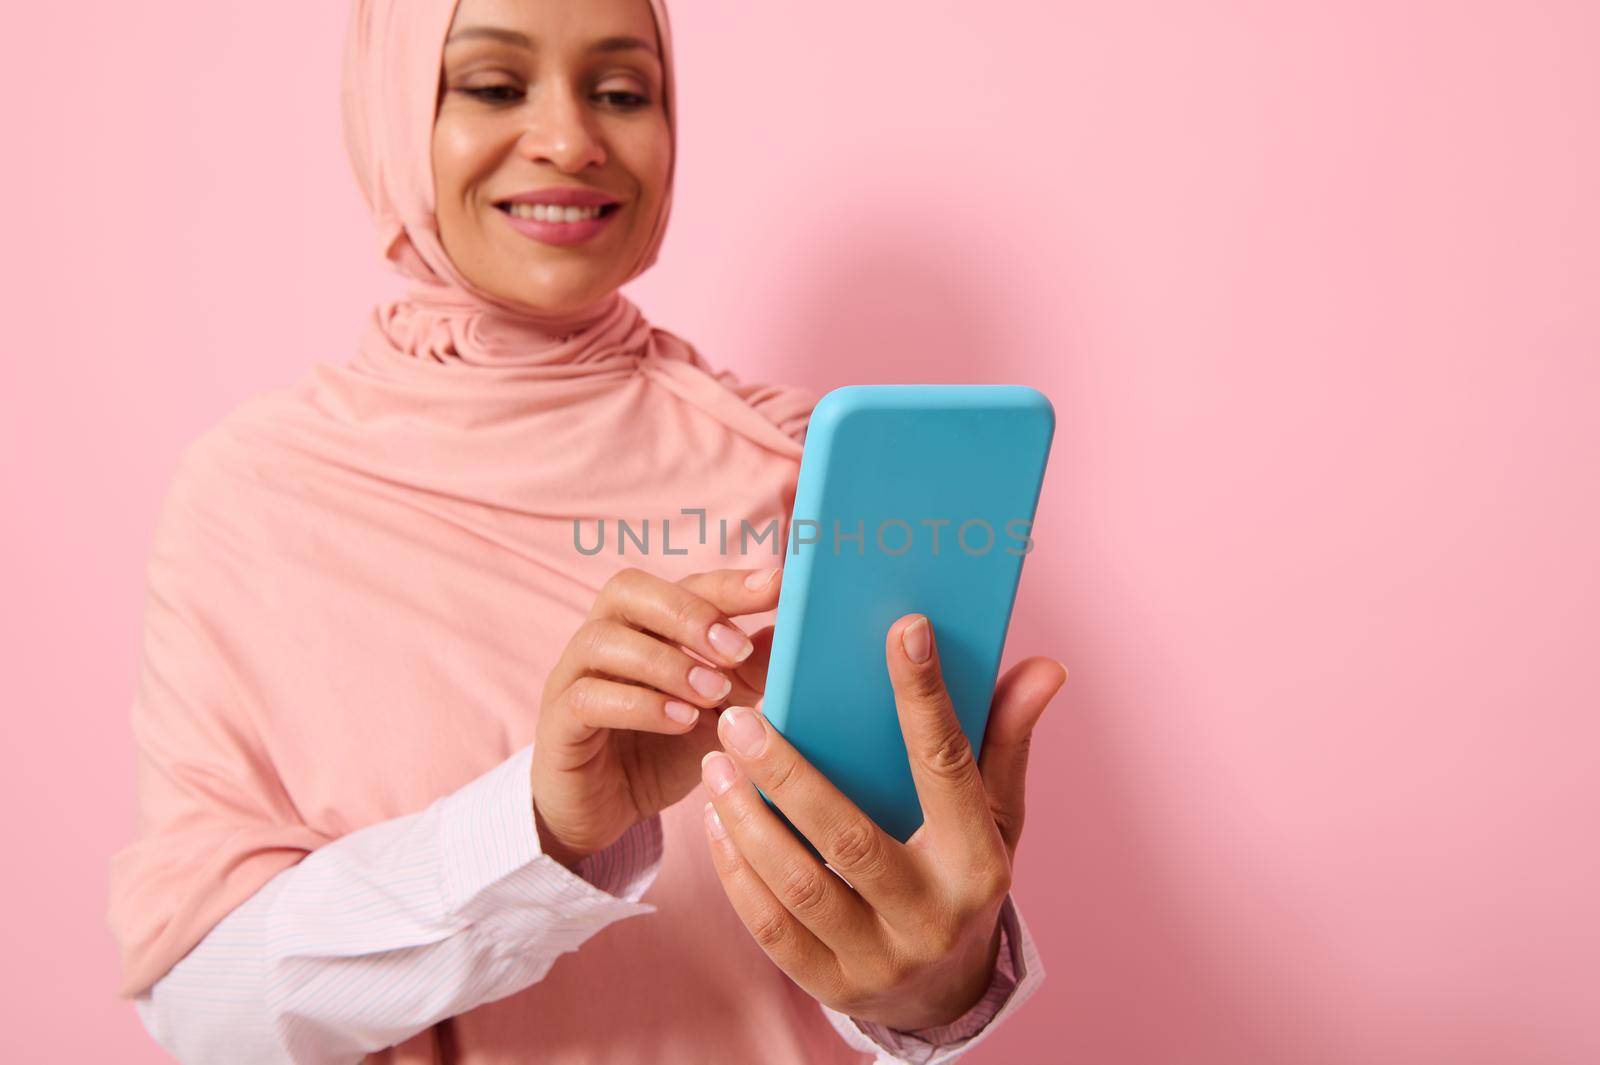 Close-up portrait of confident Arab Muslim middle aged woman in strict religious outfit and covered head in pink hijab texting a message on a mobile phone in her hands, colored background, copy space by artgf